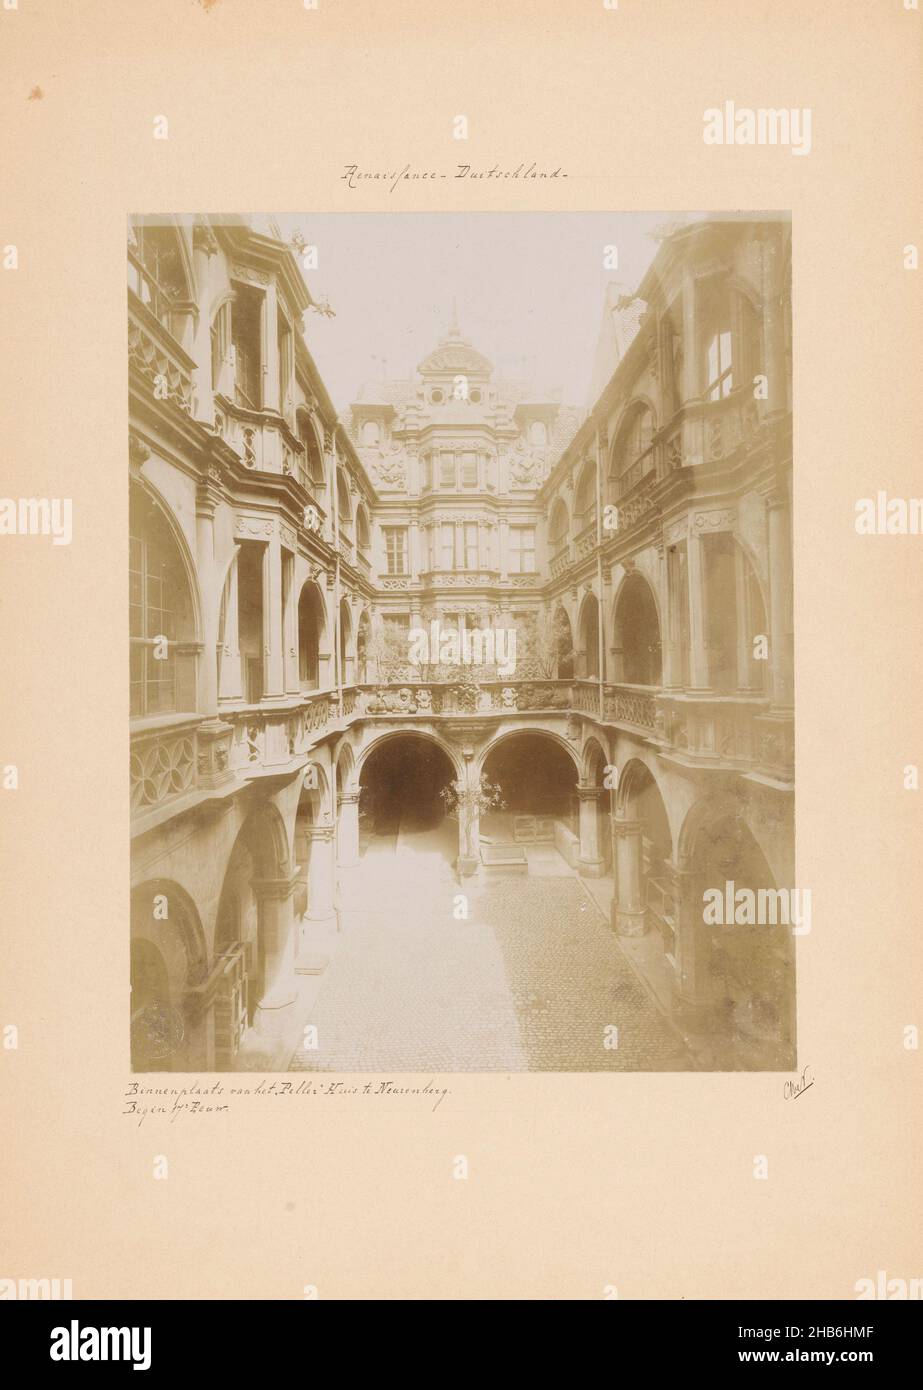 Courtyard of the Pellerhaus at Nuremberg, Courtyard of the Peller House at Nuremberg. (title on object), anonymous, publisher: W. Ebel (mentioned on object), Neurenberg, c. 1875 - c. 1900, cardboard, photographic support, height 272 mm × width 212 mm Stock Photo